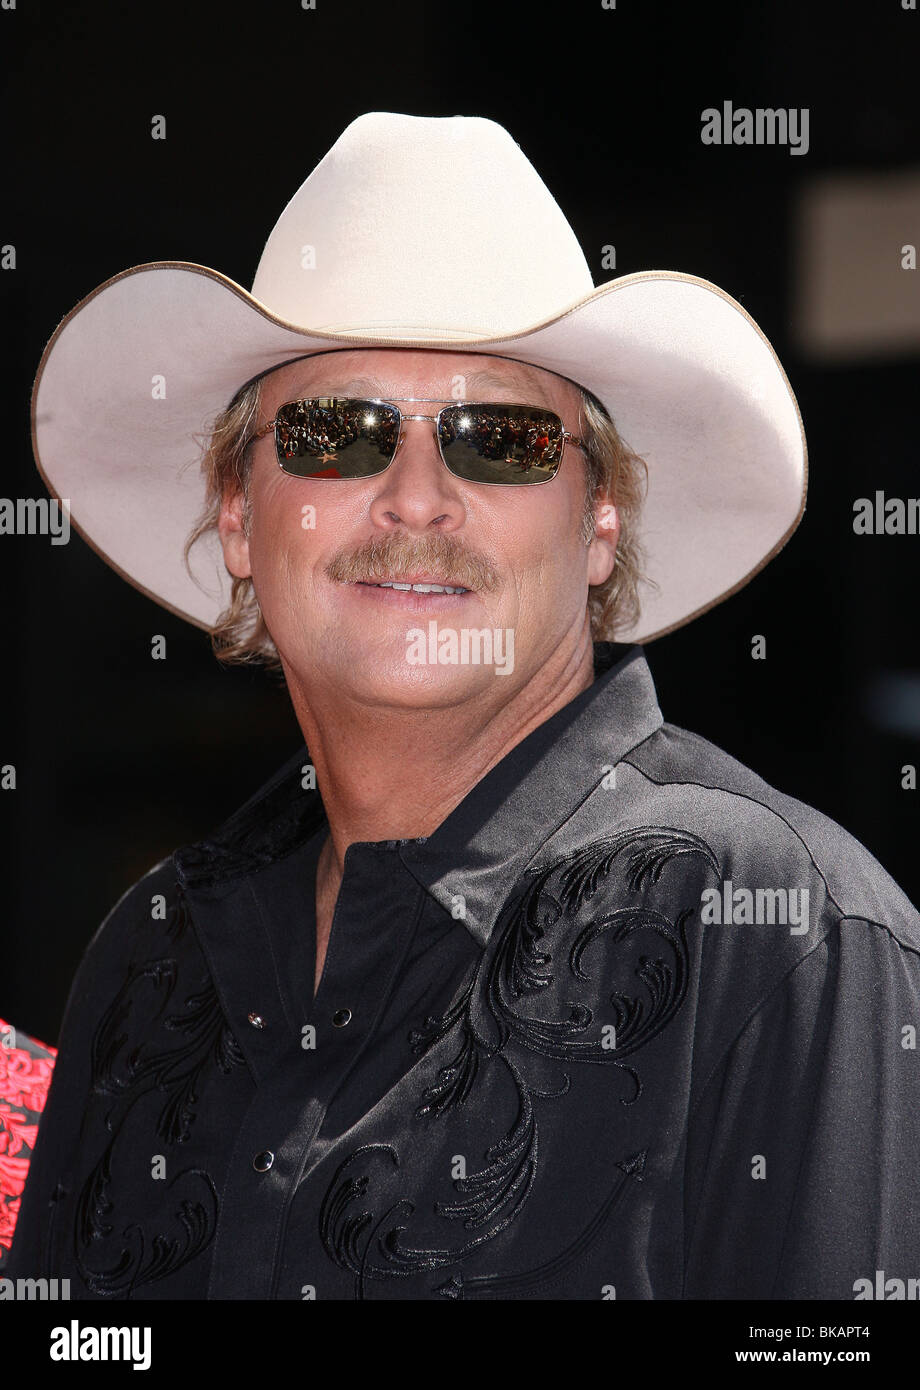 ALAN JACKSON WIFE DAUGHTERS ALAN JACKSON STAR ON THE HOLLYWOOD WALK OF FAME  HOLLYWOOD LOS ANGELES CA 16 April 2010 Stock Photo - Alamy